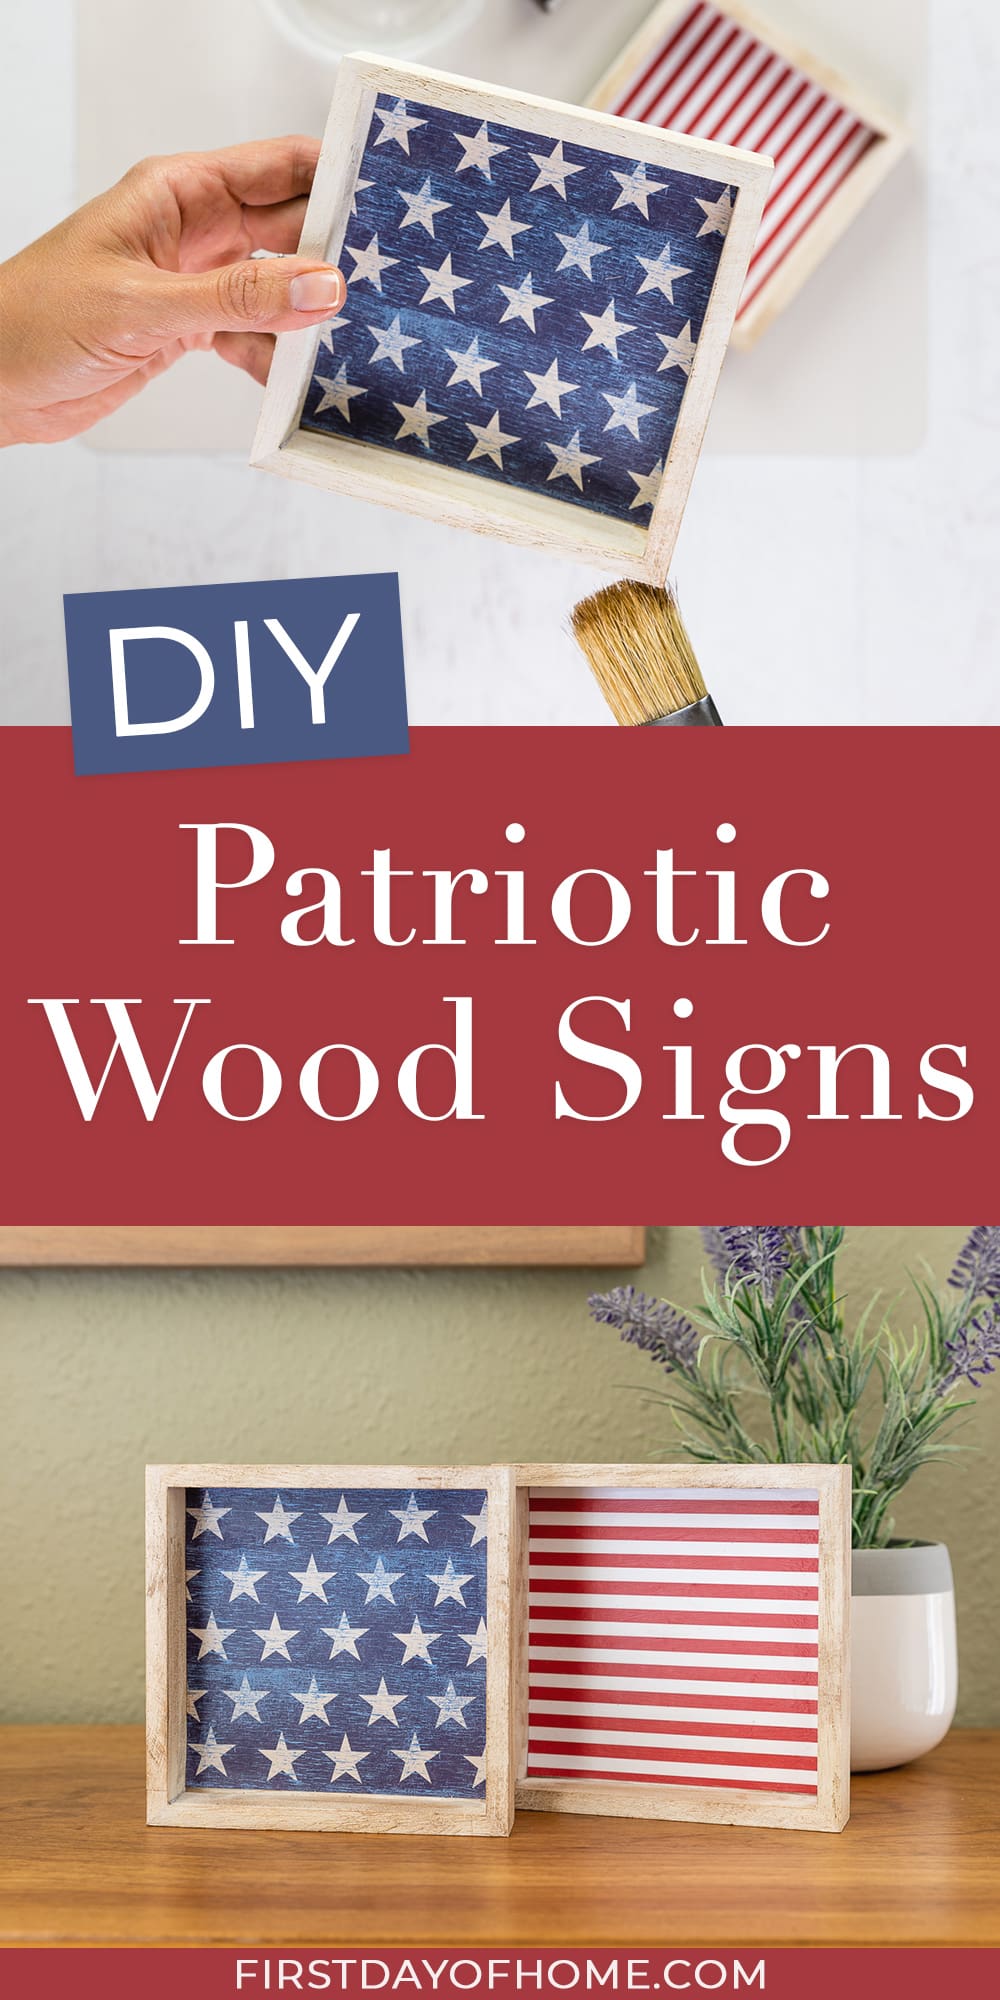 Collage of steps to make decoupage patriotic wood signs and the finished project with a U.S. flag pattern of stars and stripes. Text overlay reads "DIY Patriotic Wood Signs"